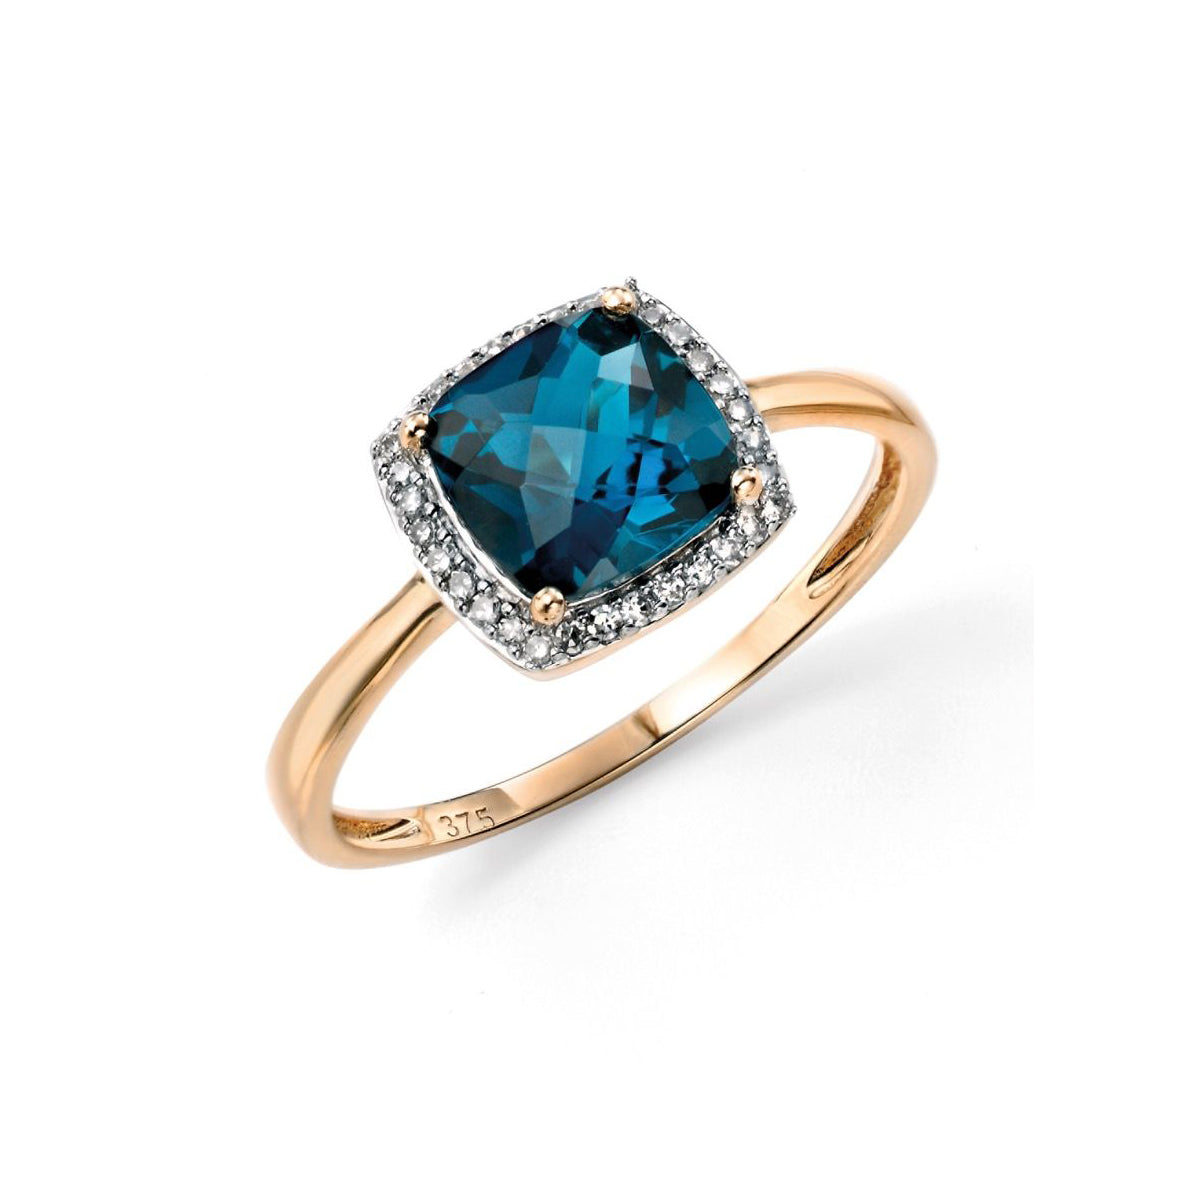 Checkerboard London Blue Topaz Ring with Diamond Surround in 9ct Yellow Gold